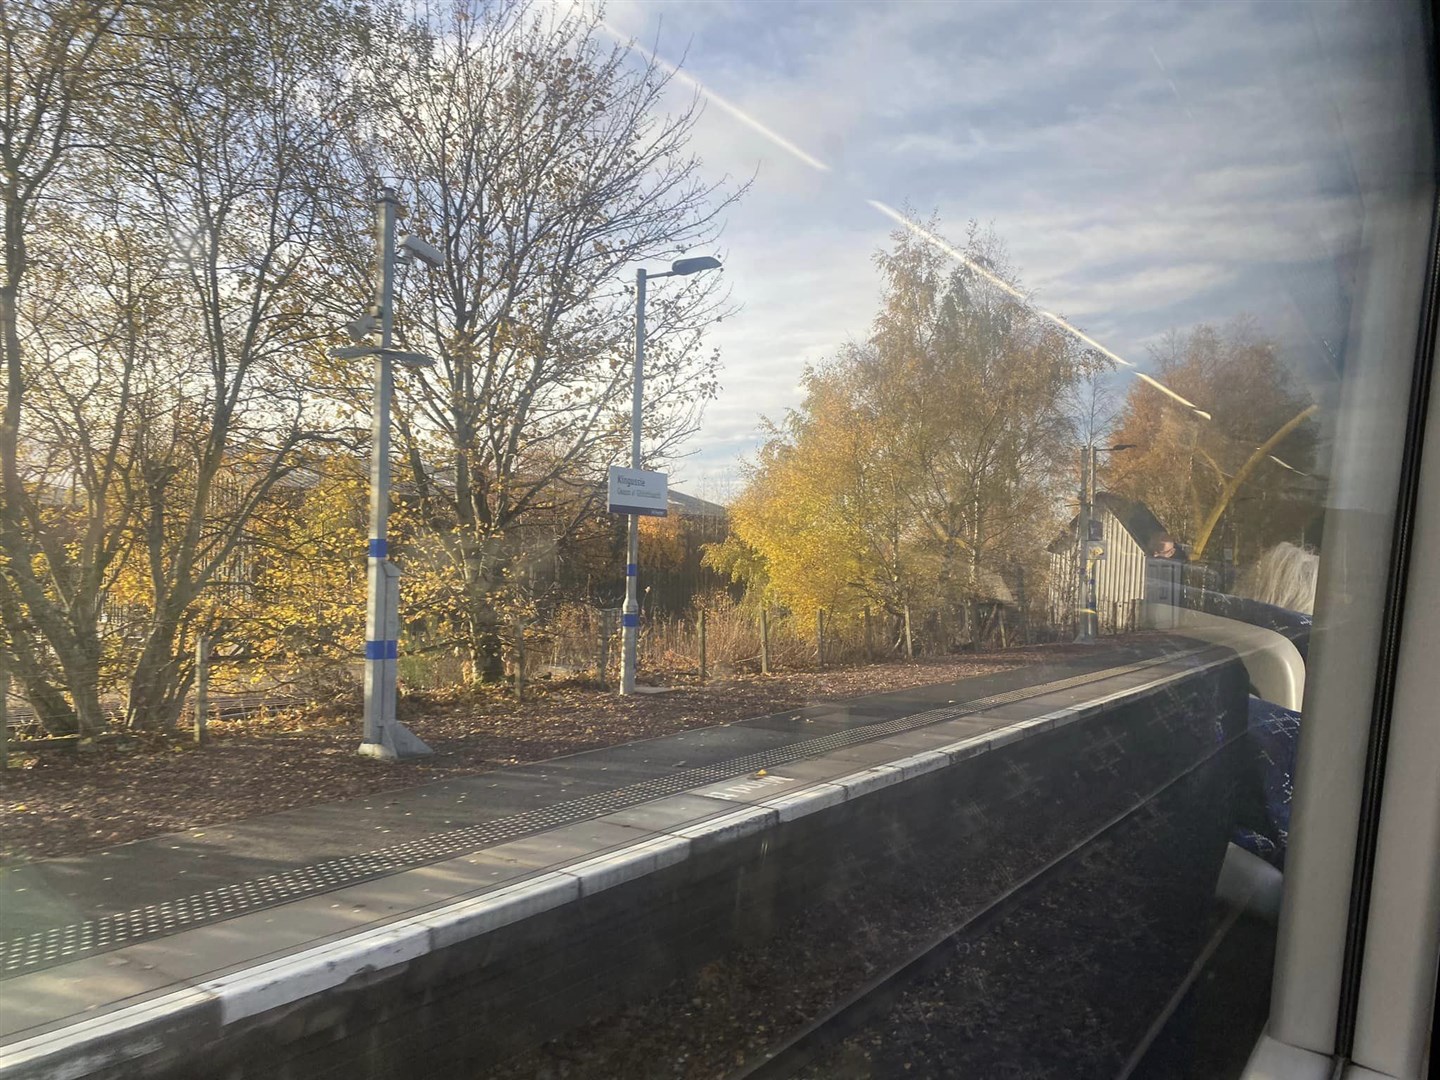 CLOSED TO TRAVELLERS: Platform 2 at Kingussie photographed today from the train on Platform one by Mr Ormiston.